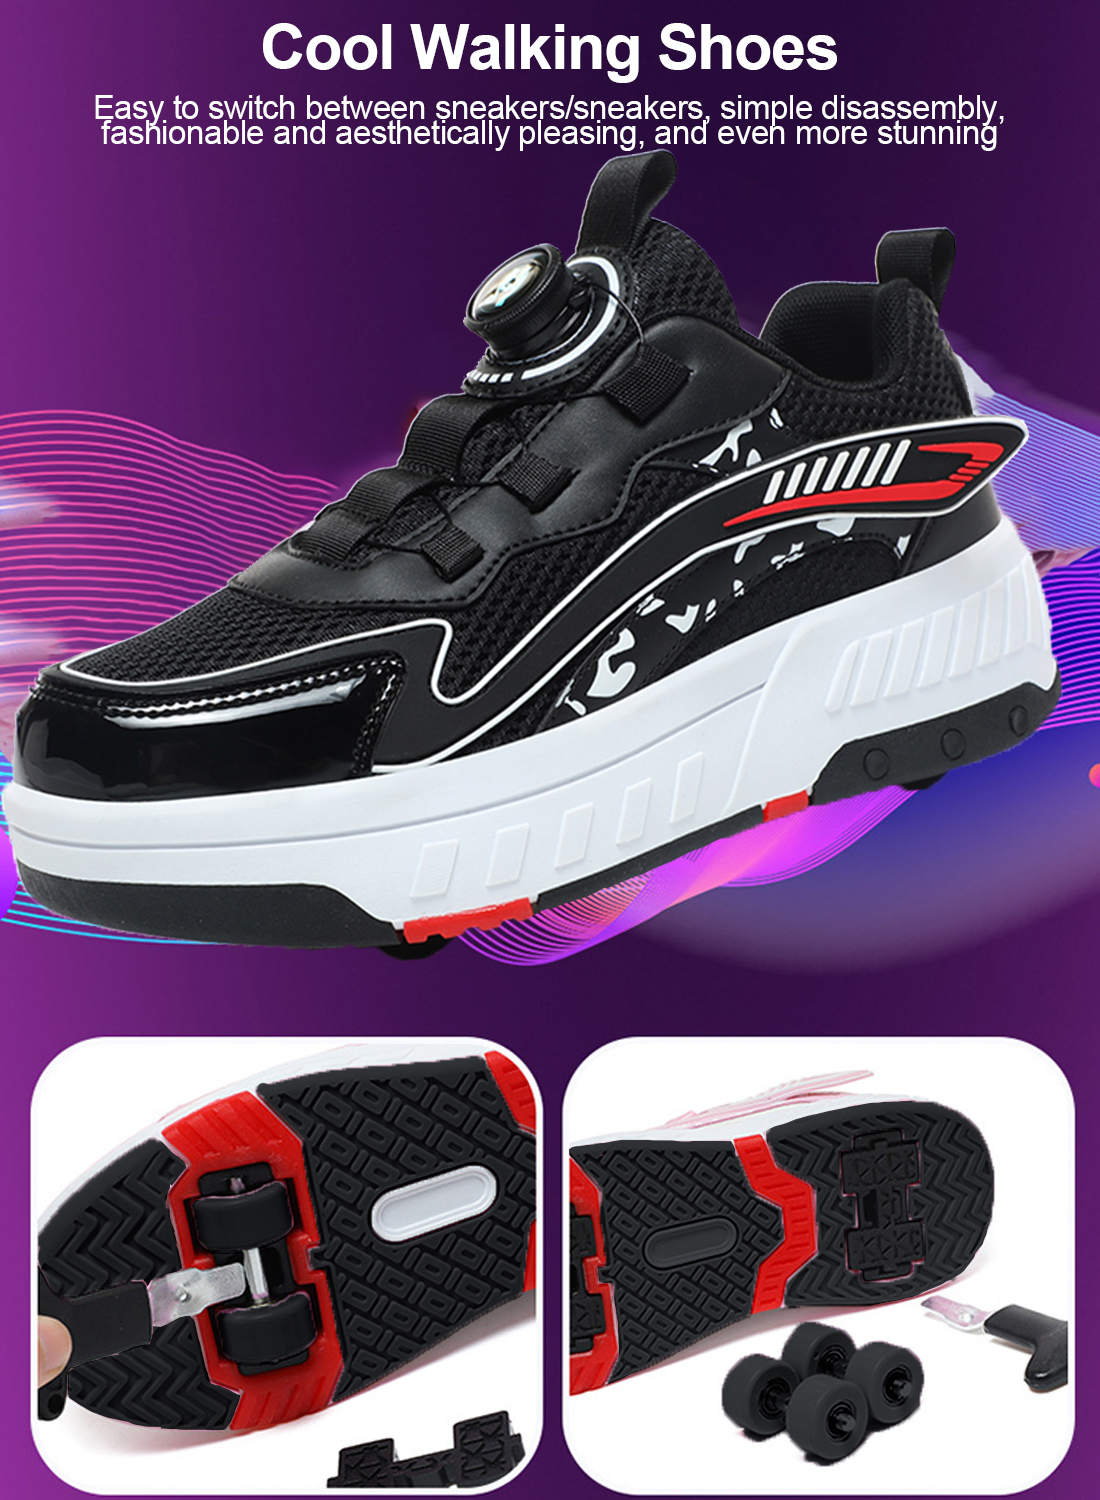 Kids Roller Skate Shoes Fashion With Four Wheels Sport Sneaker Outdoor For Kids For Boys Girls